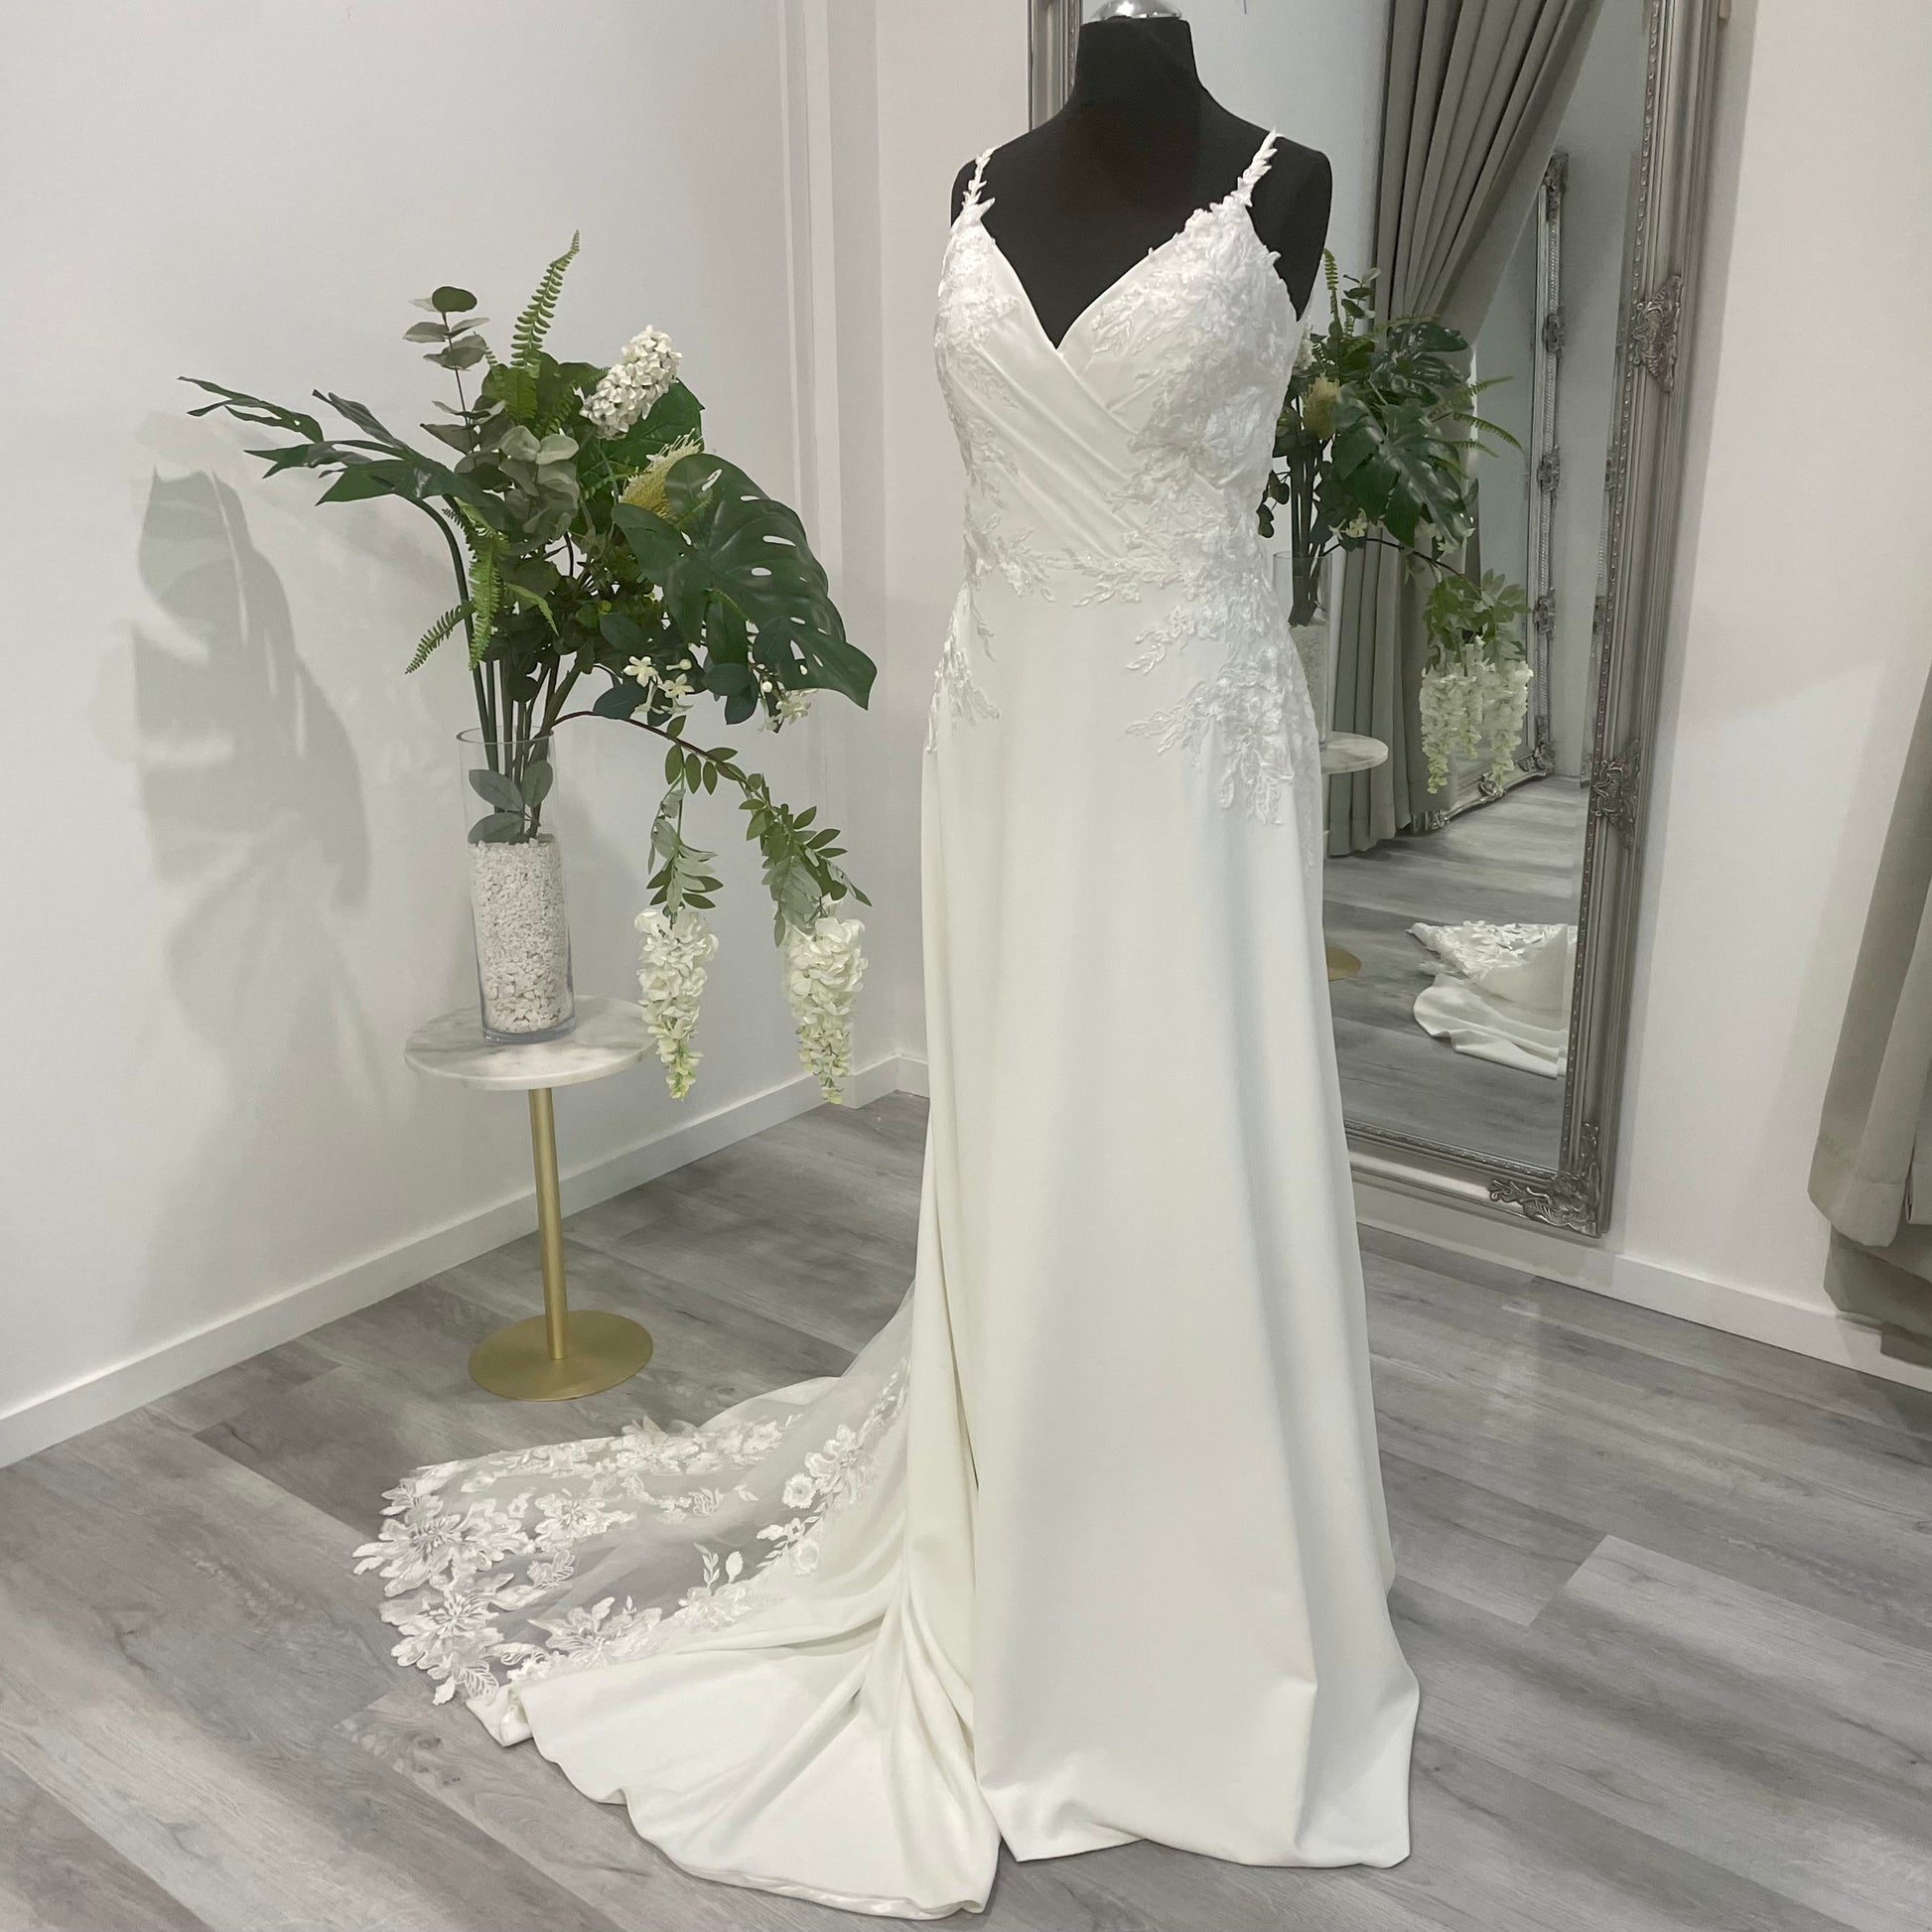 Harlow Wedding Dress with lace detailing and V-neckline on display at Divine Bridal salon.